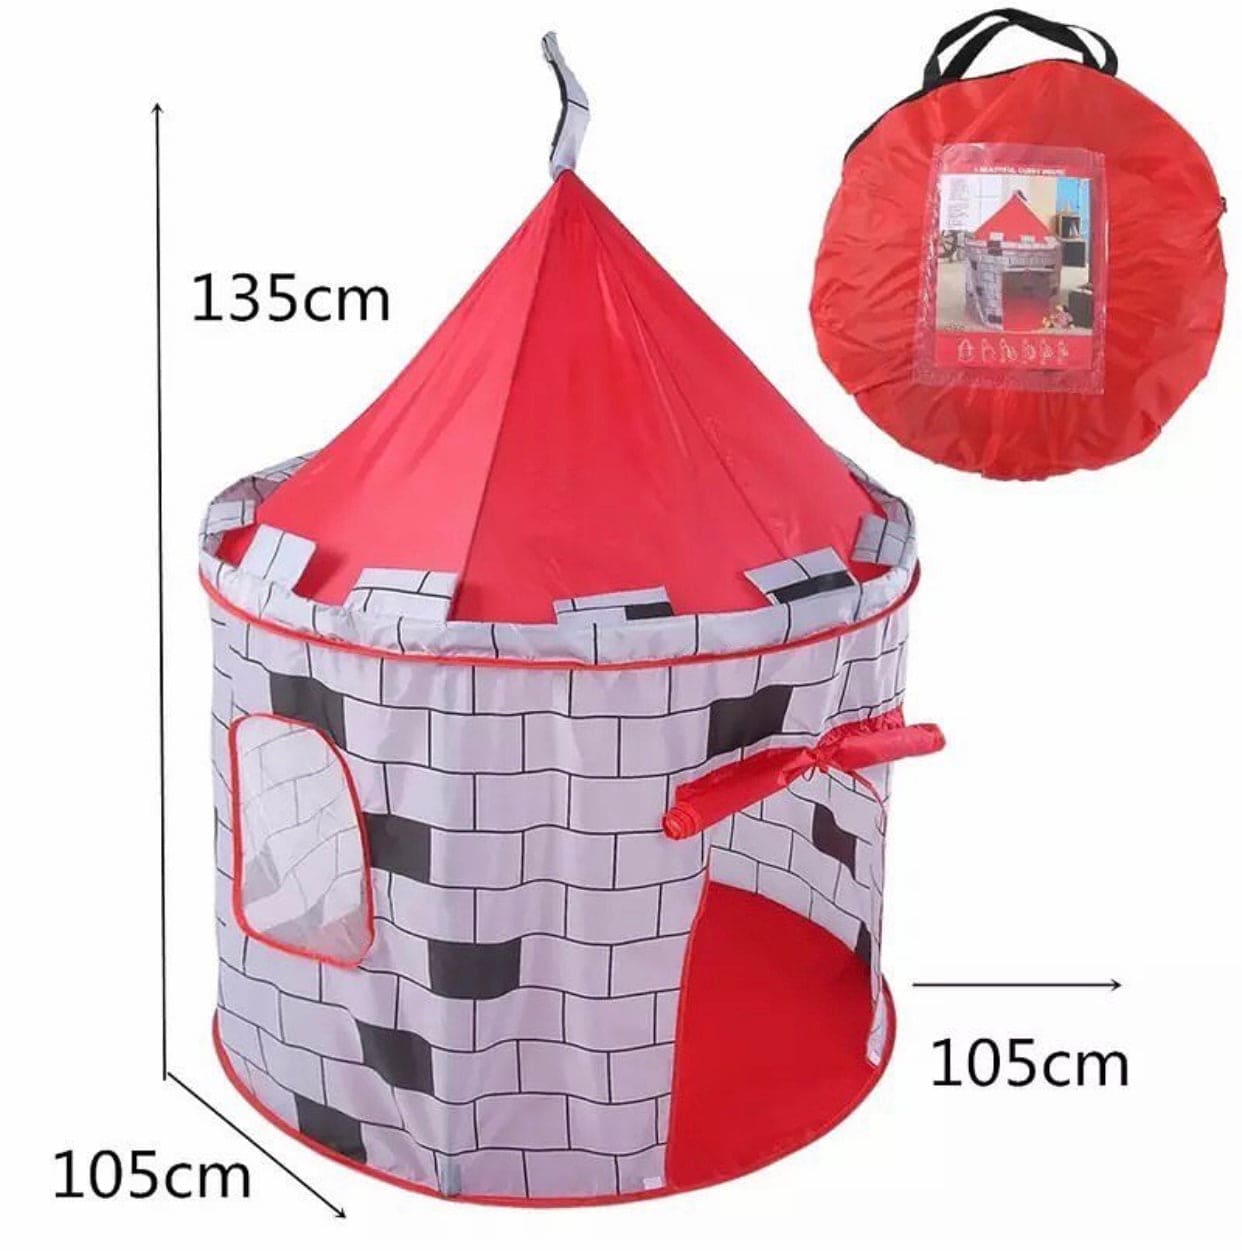 Foldable Fort Style Outdoor Camping Tent, Indoor & Outdoor Large Kids Play Tent, Durable Kids Playhouse, Foldable Storage Pop Up Tent